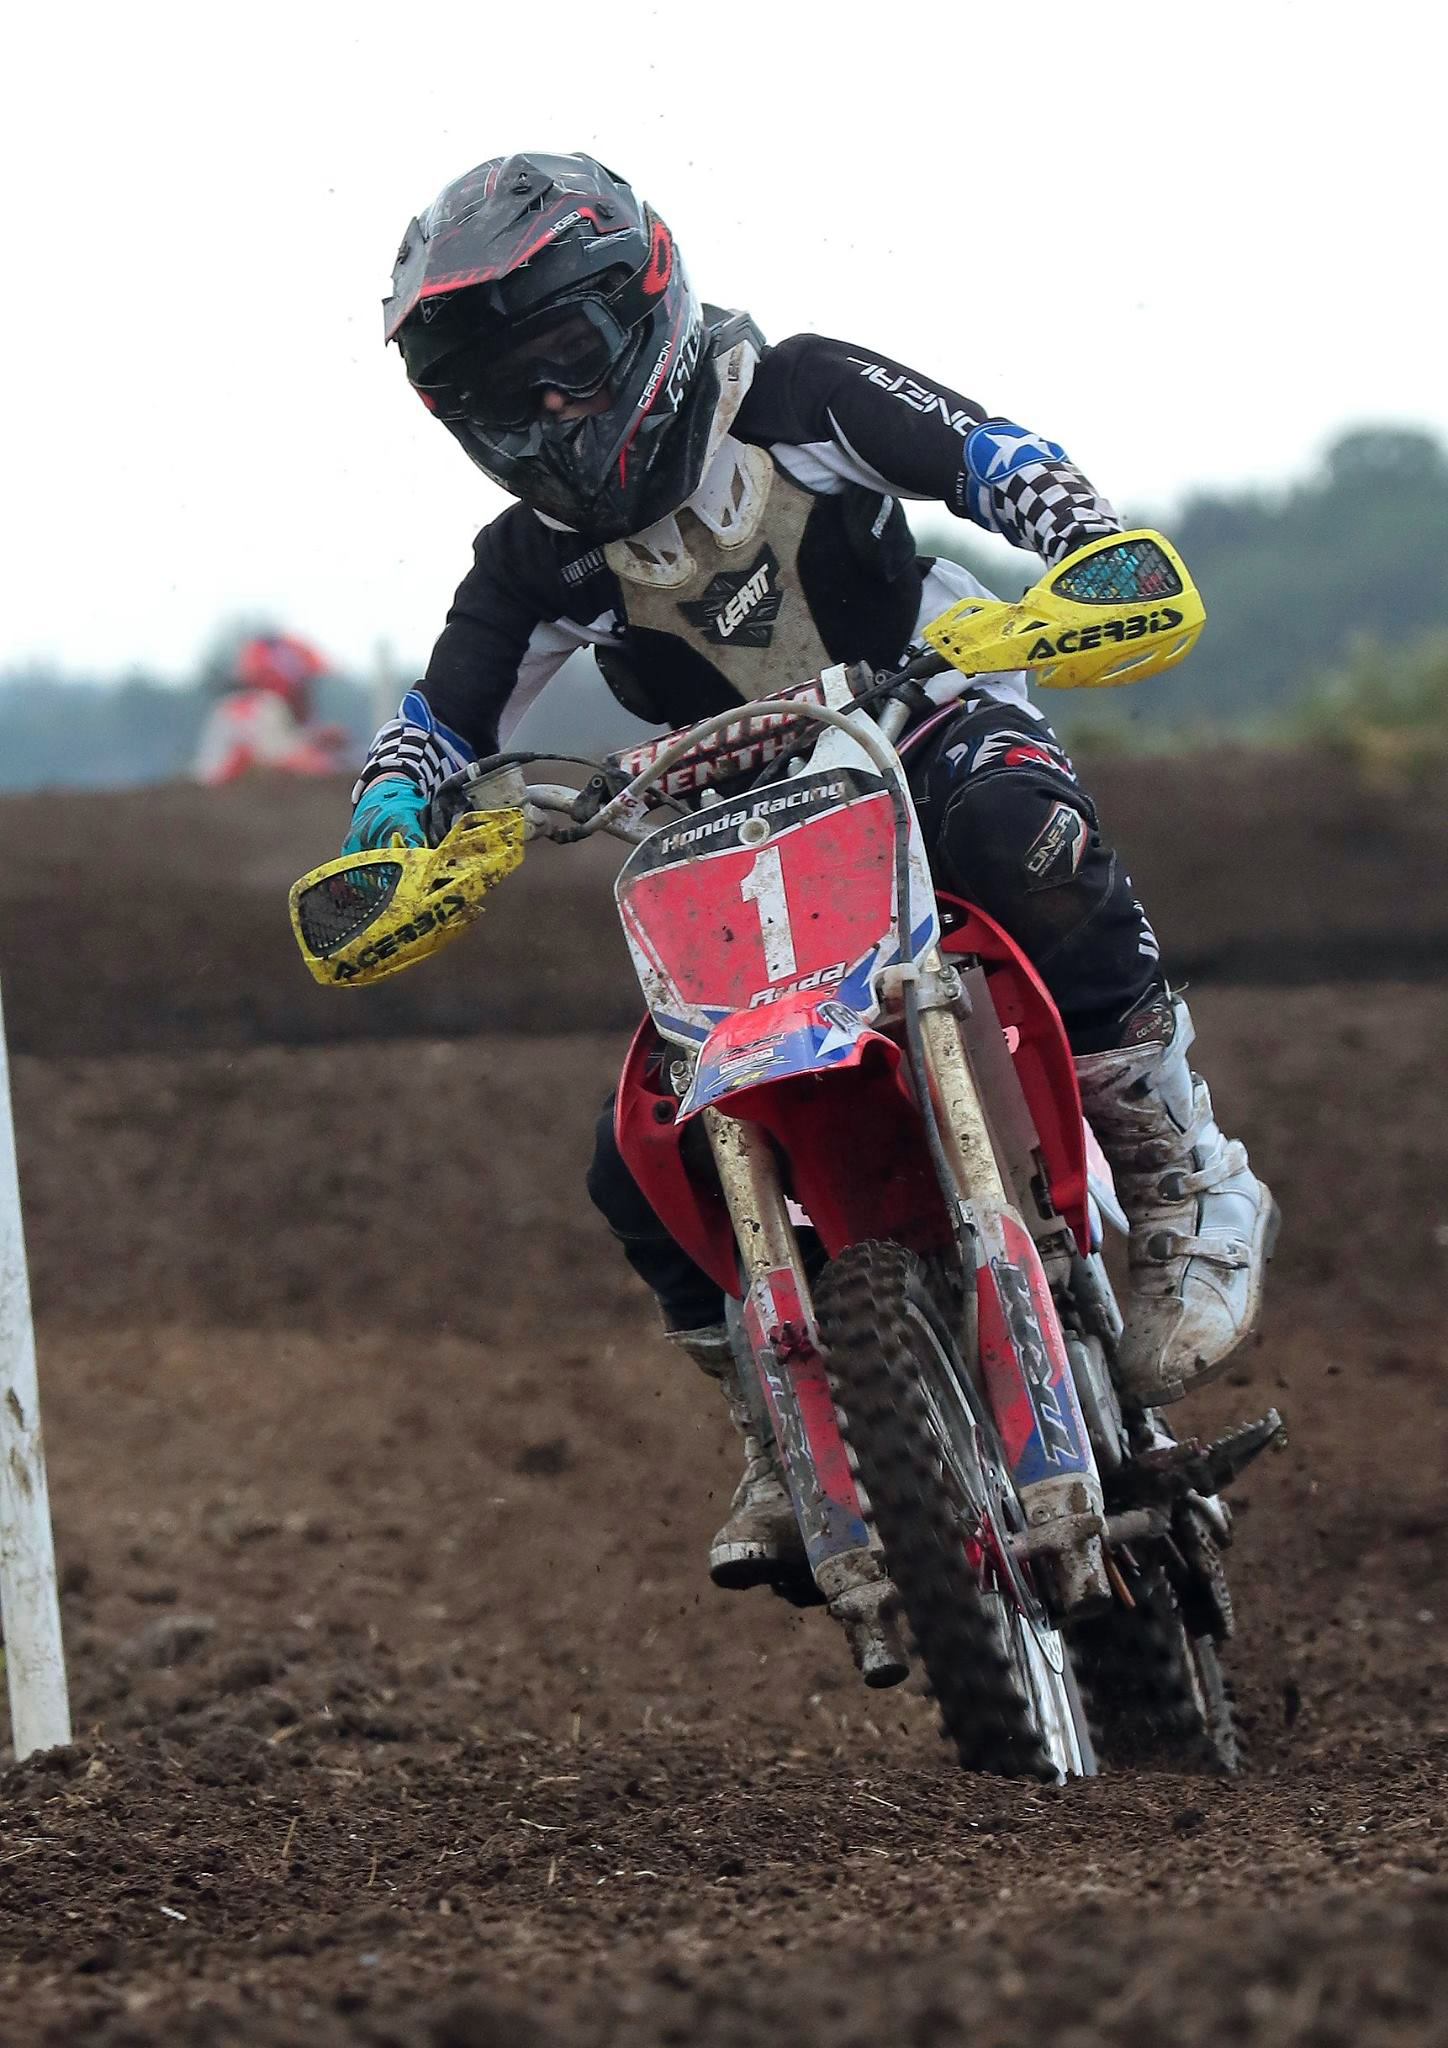 CALM BEFORE THE FALL: Kieran Rudd in action at Chatteris on Sunday. Photo by ANTHONY HYLTON